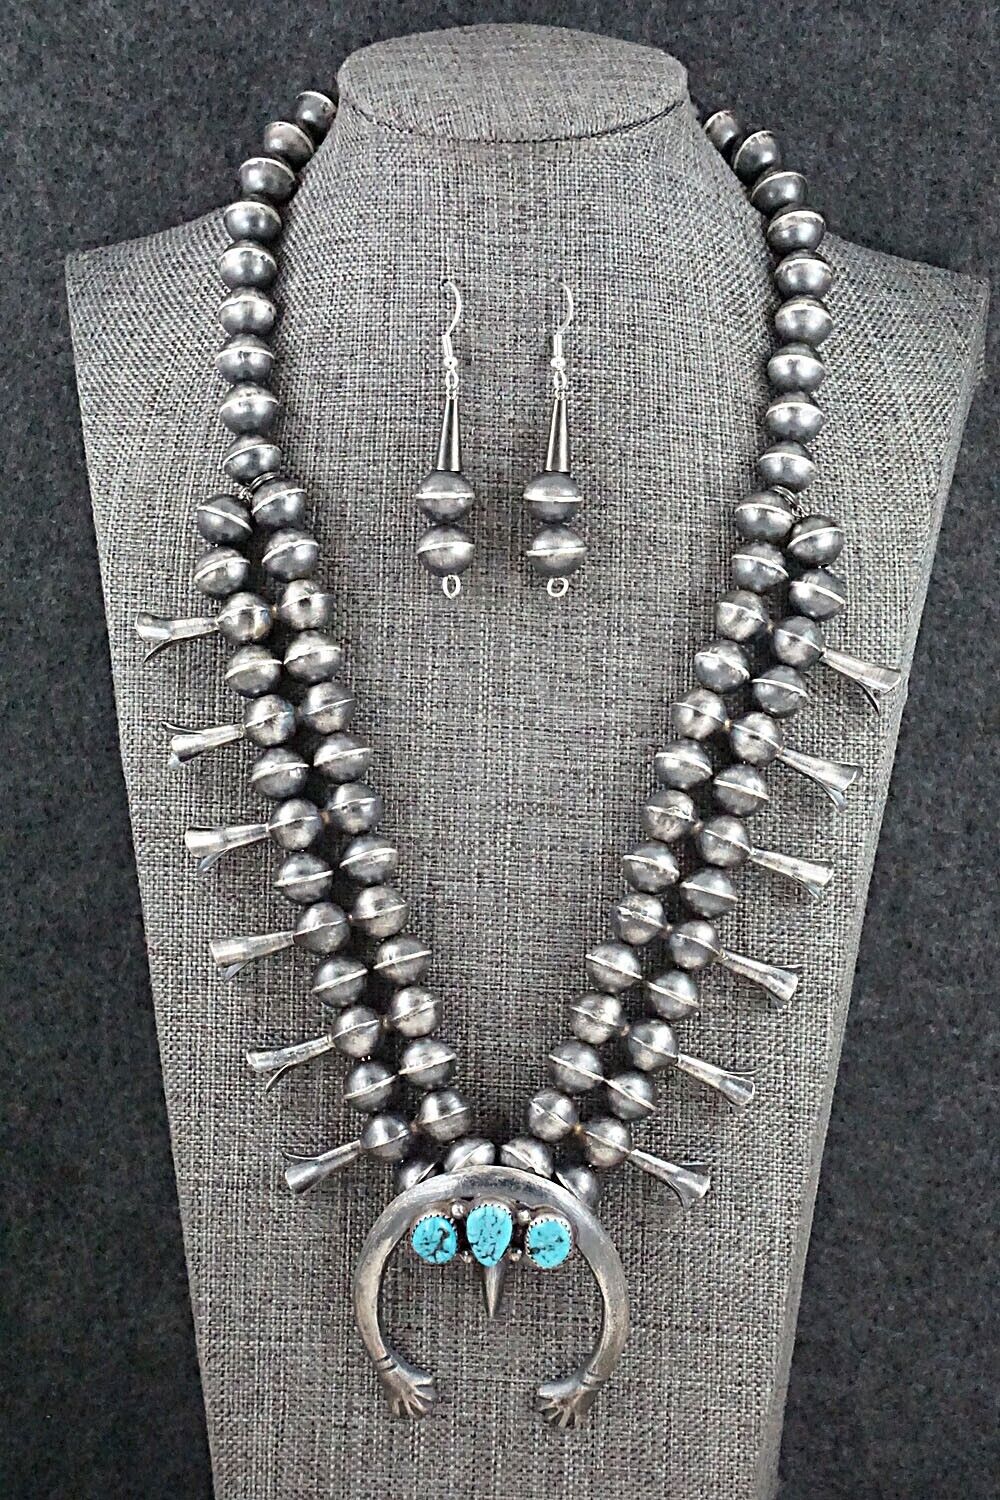 Navajo Squash Blossom Necklace Sterling Silver Turquoise | eBay